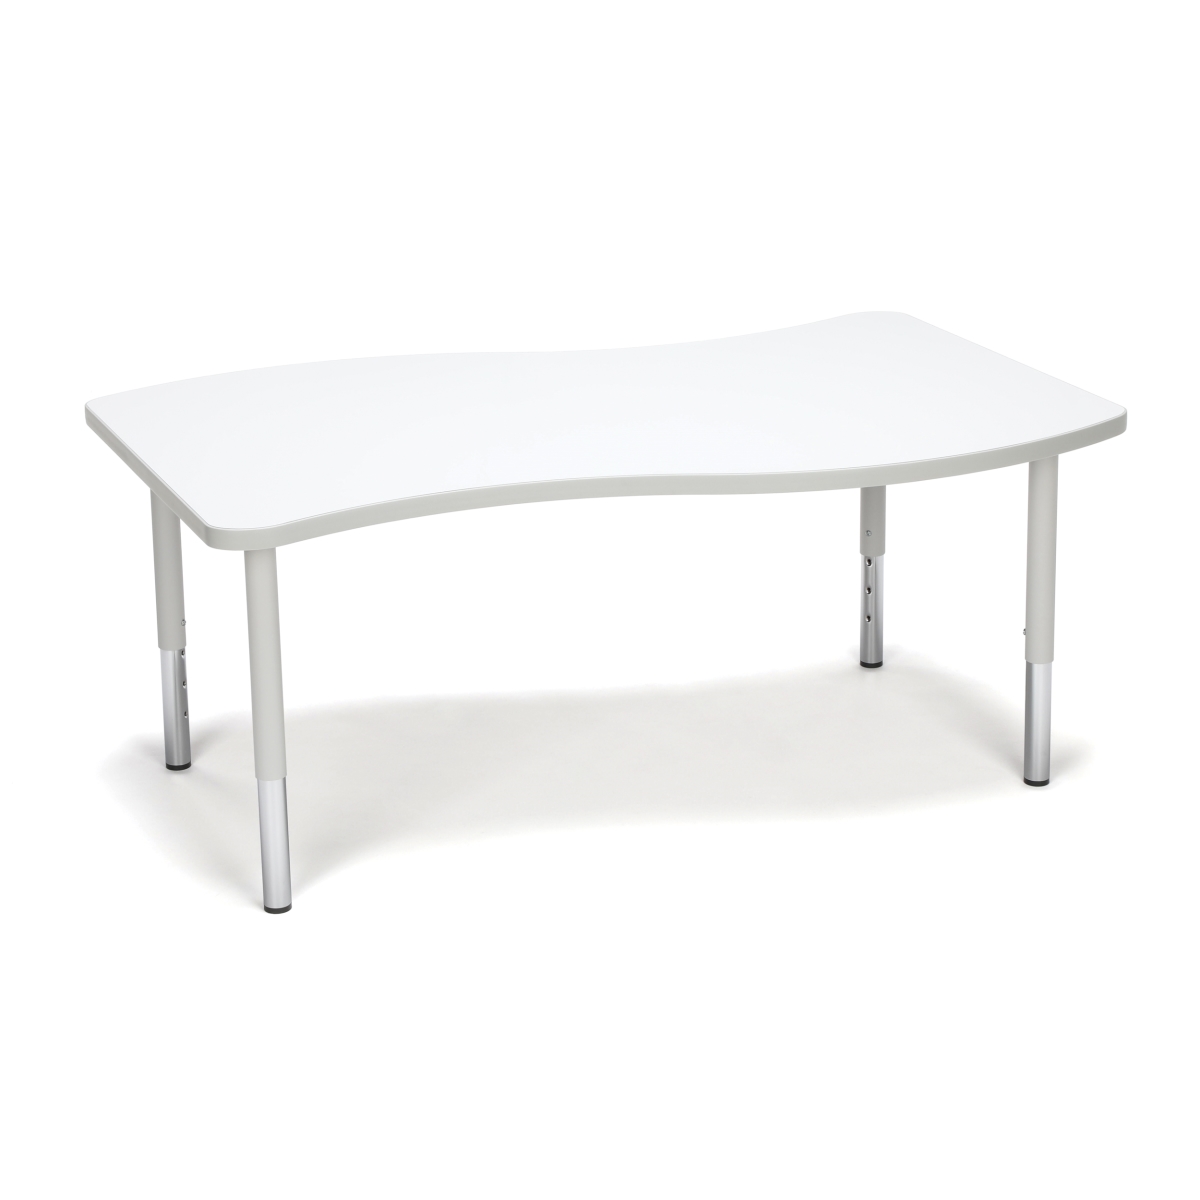 Wave-l-sl-wht Adapt Series Large Wave Student Table - 18-26 In. Height Adjustable Desk , White